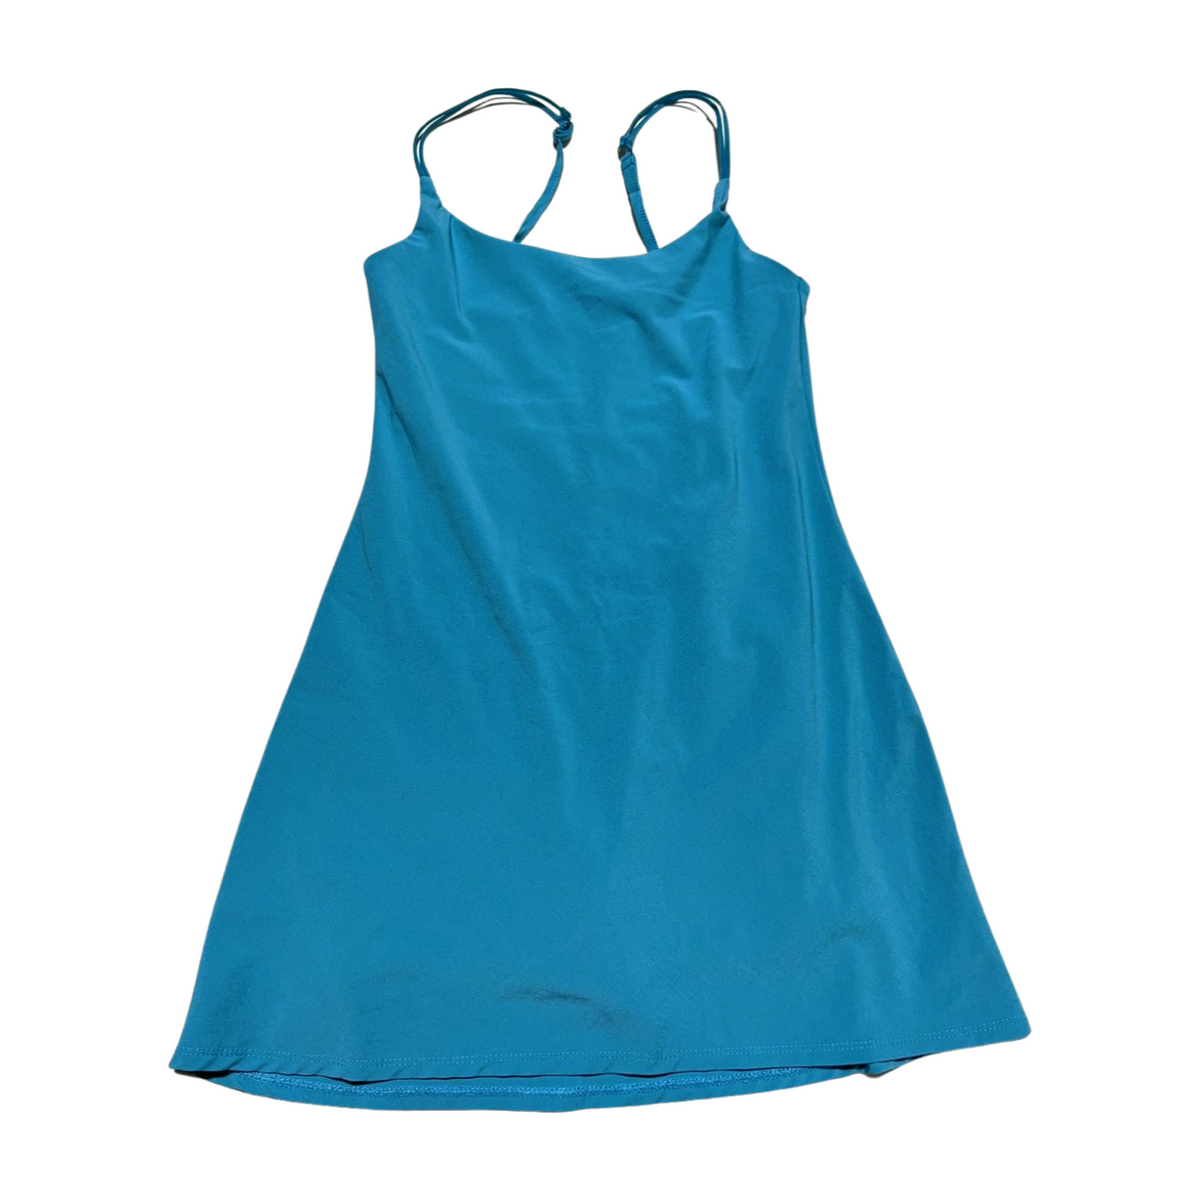 Abercrombie and Fitch- Blue Exercise Dress